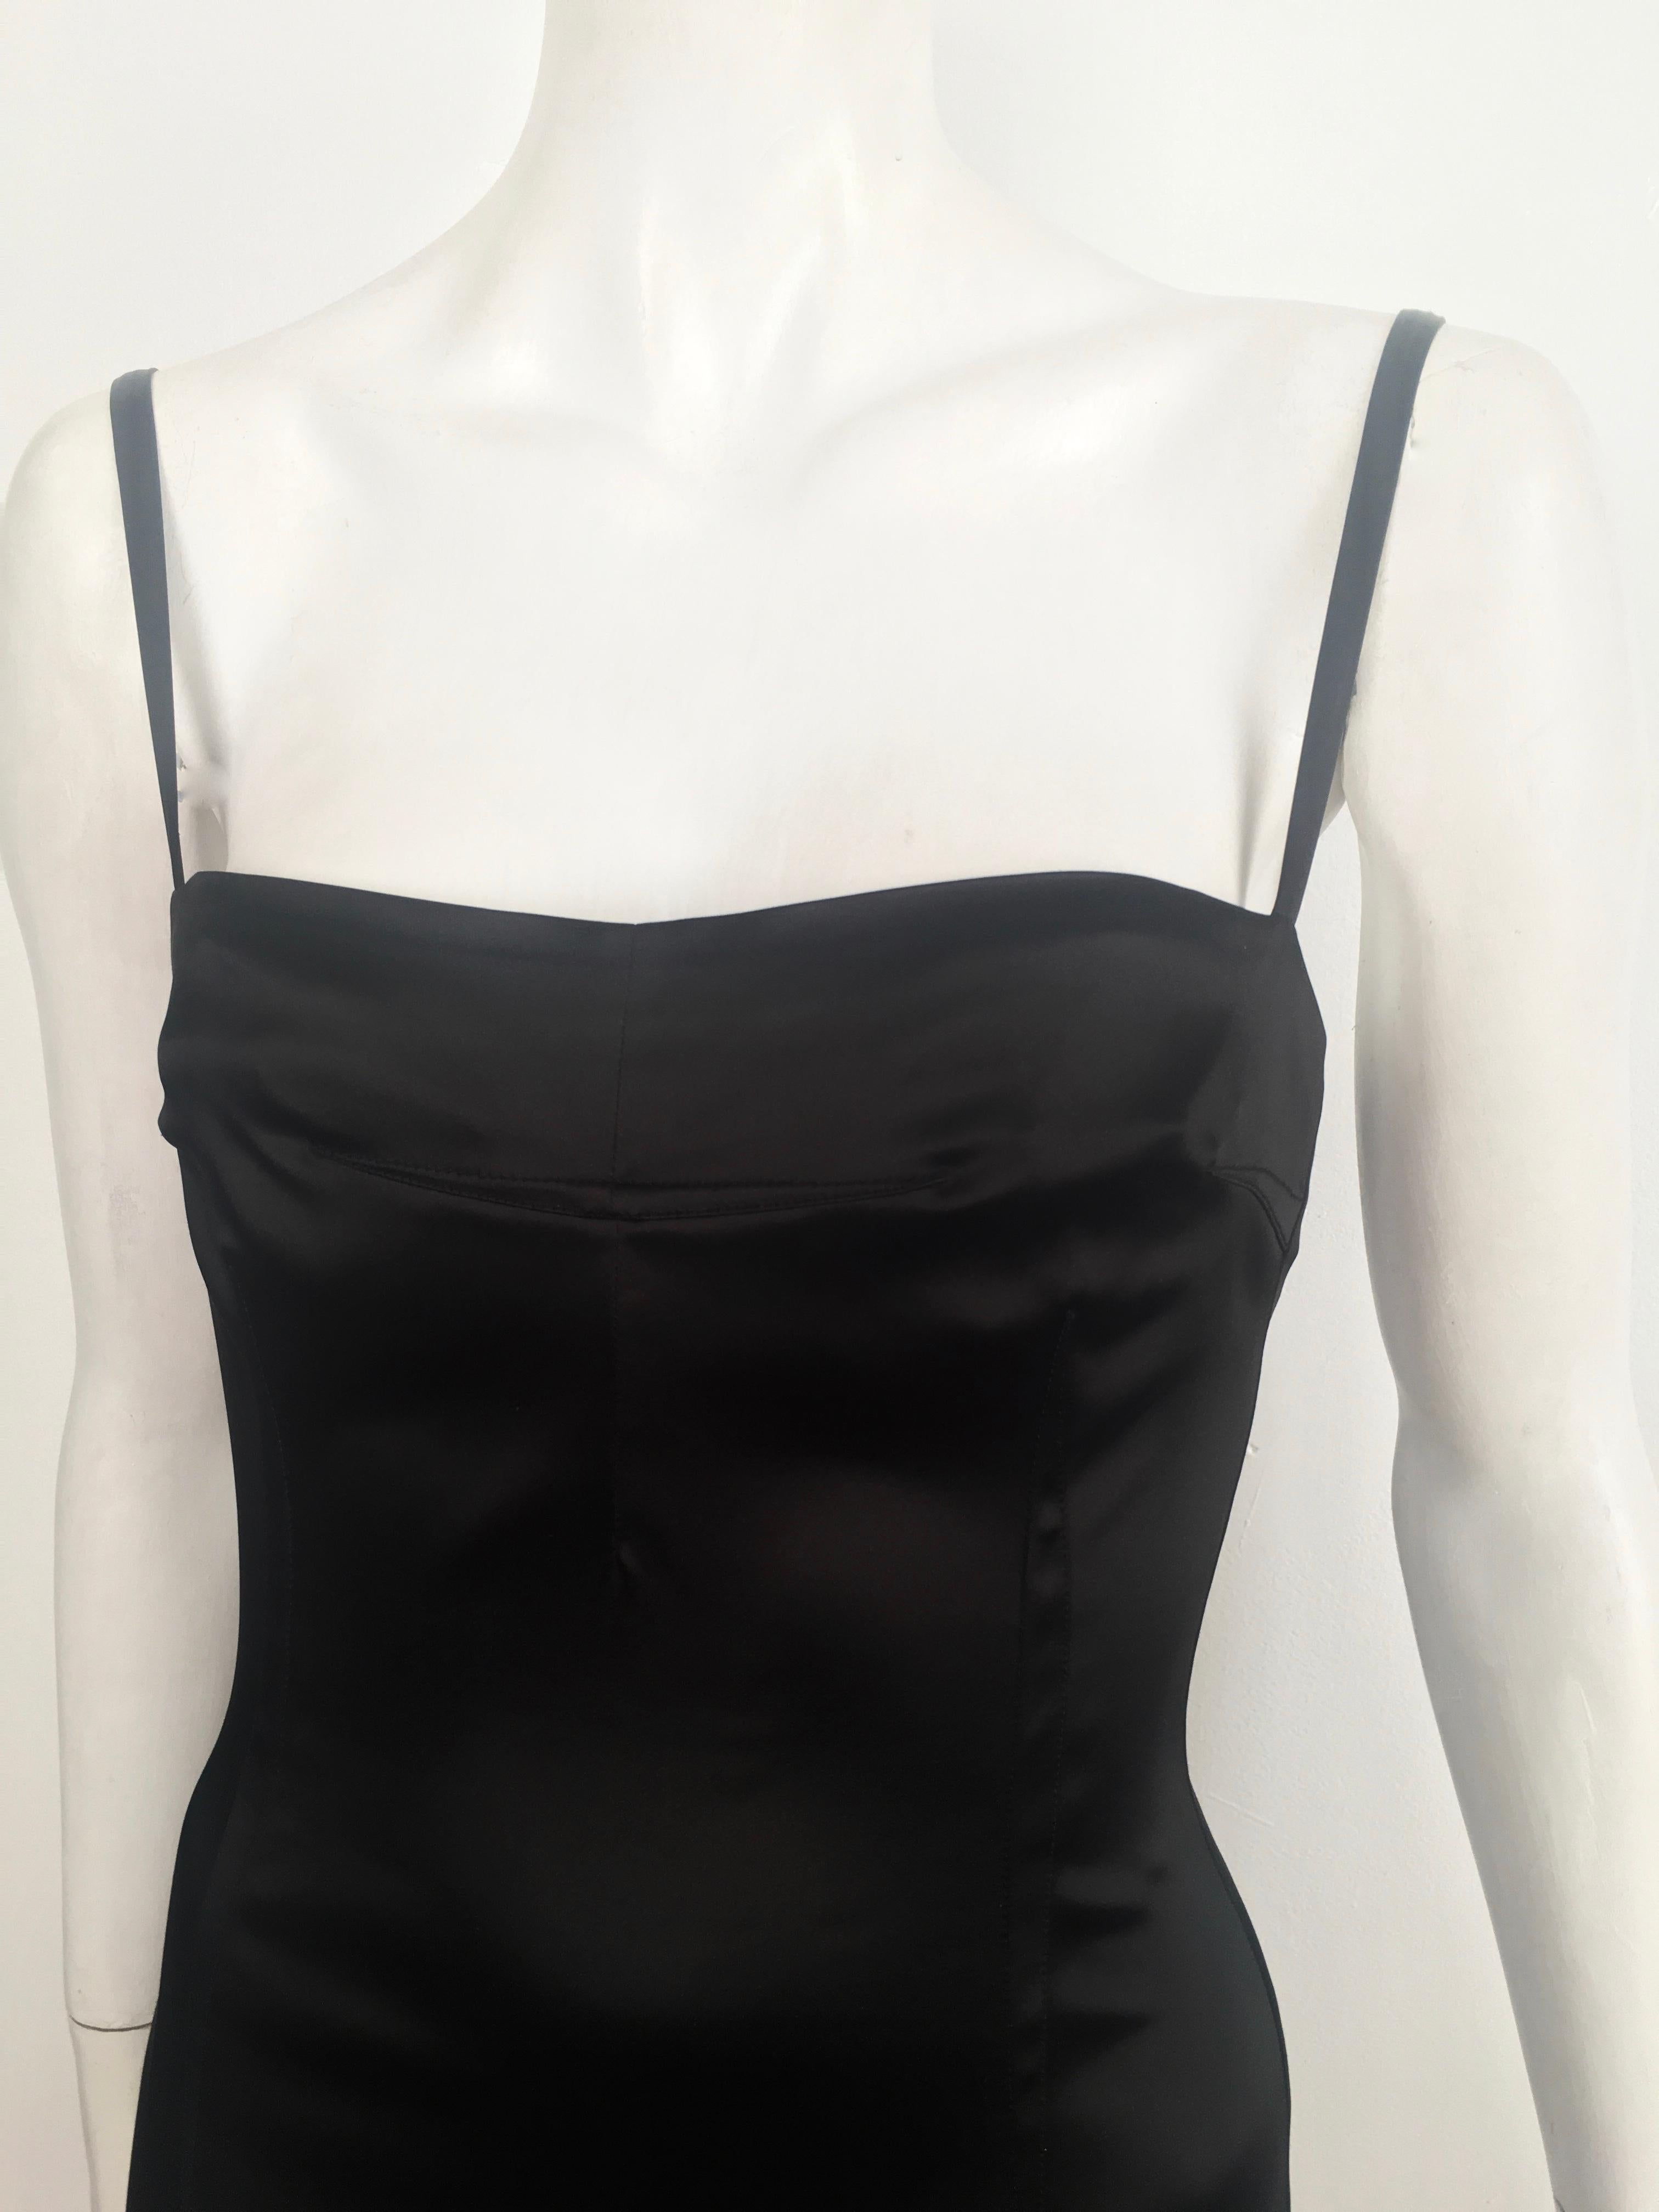 Dolce & Gabbana 1990s black stretchy sexy cocktail evening dress is an Italian size 44 and an USA size 4.  This fits Matilda the Mannequin, who wears size 4, to perfection... so if you have the identical body structure as Matilda this would be for